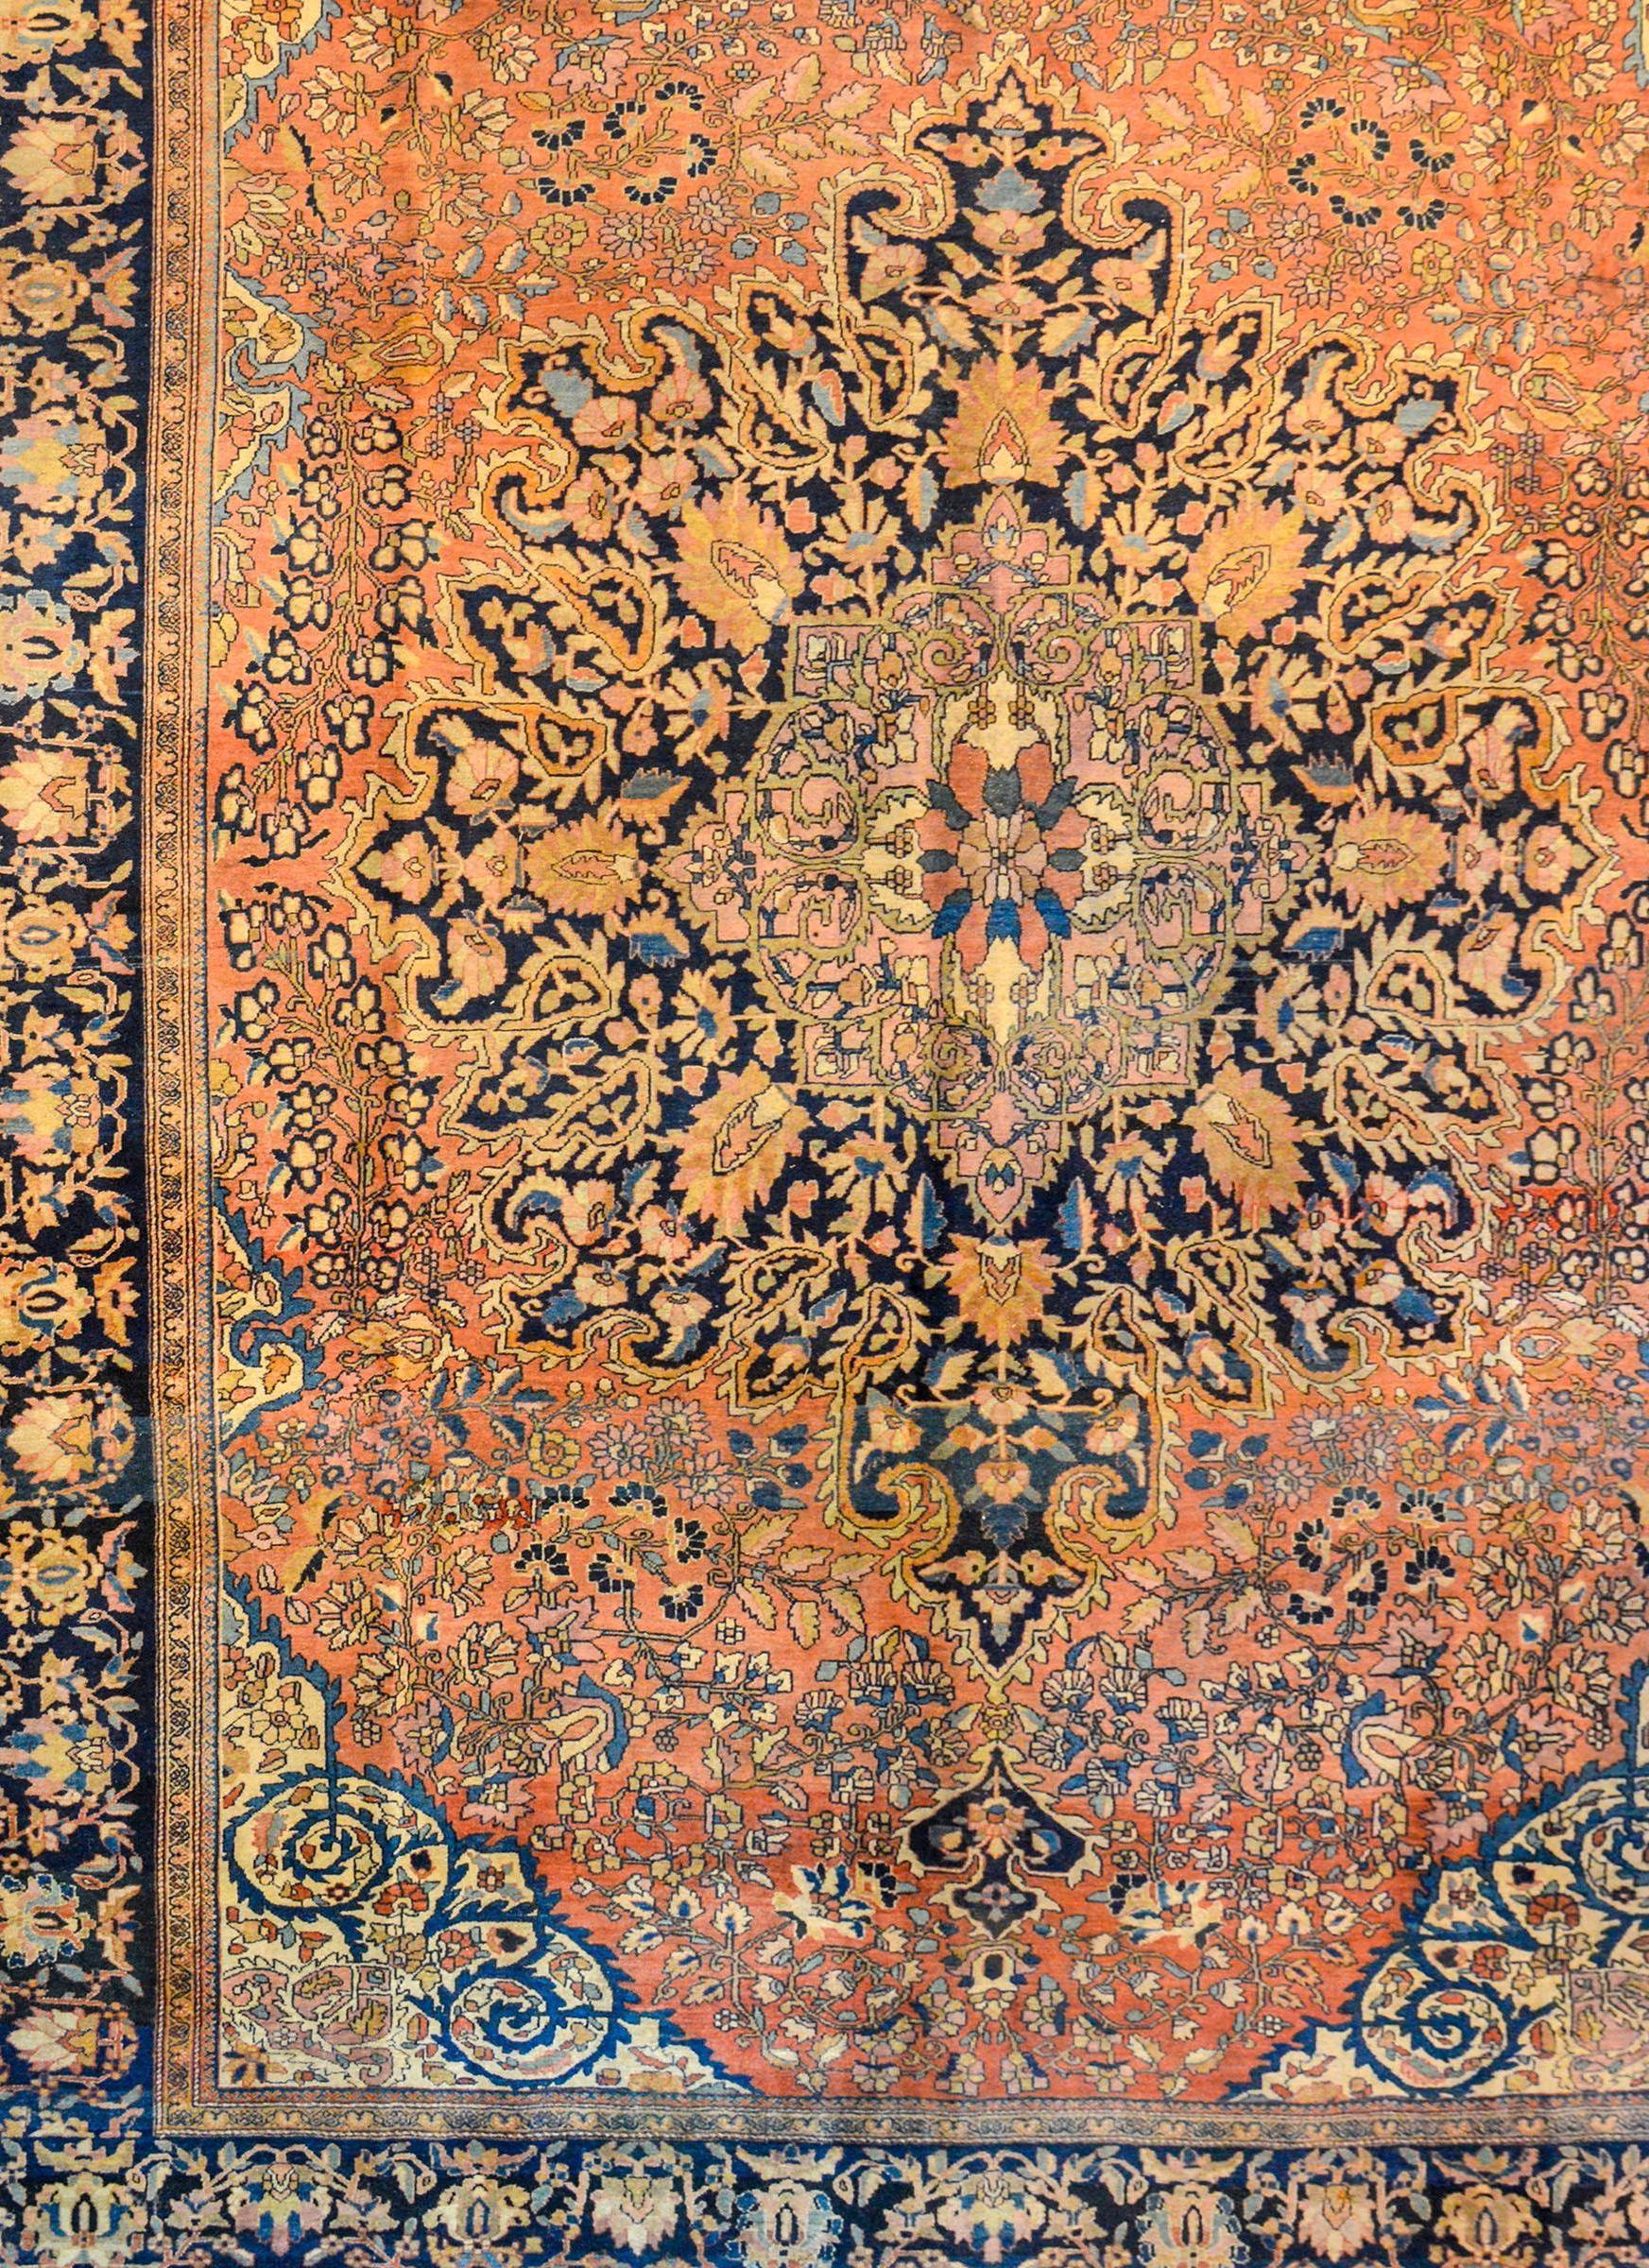 A gorgeous early 20th century Persian Sarouk Farahan rug with a large elaborate central medallion with central flower and myriad vines radiating out from the center. The medallion lives amidst a field of densely woven flowers and vines, all woven in